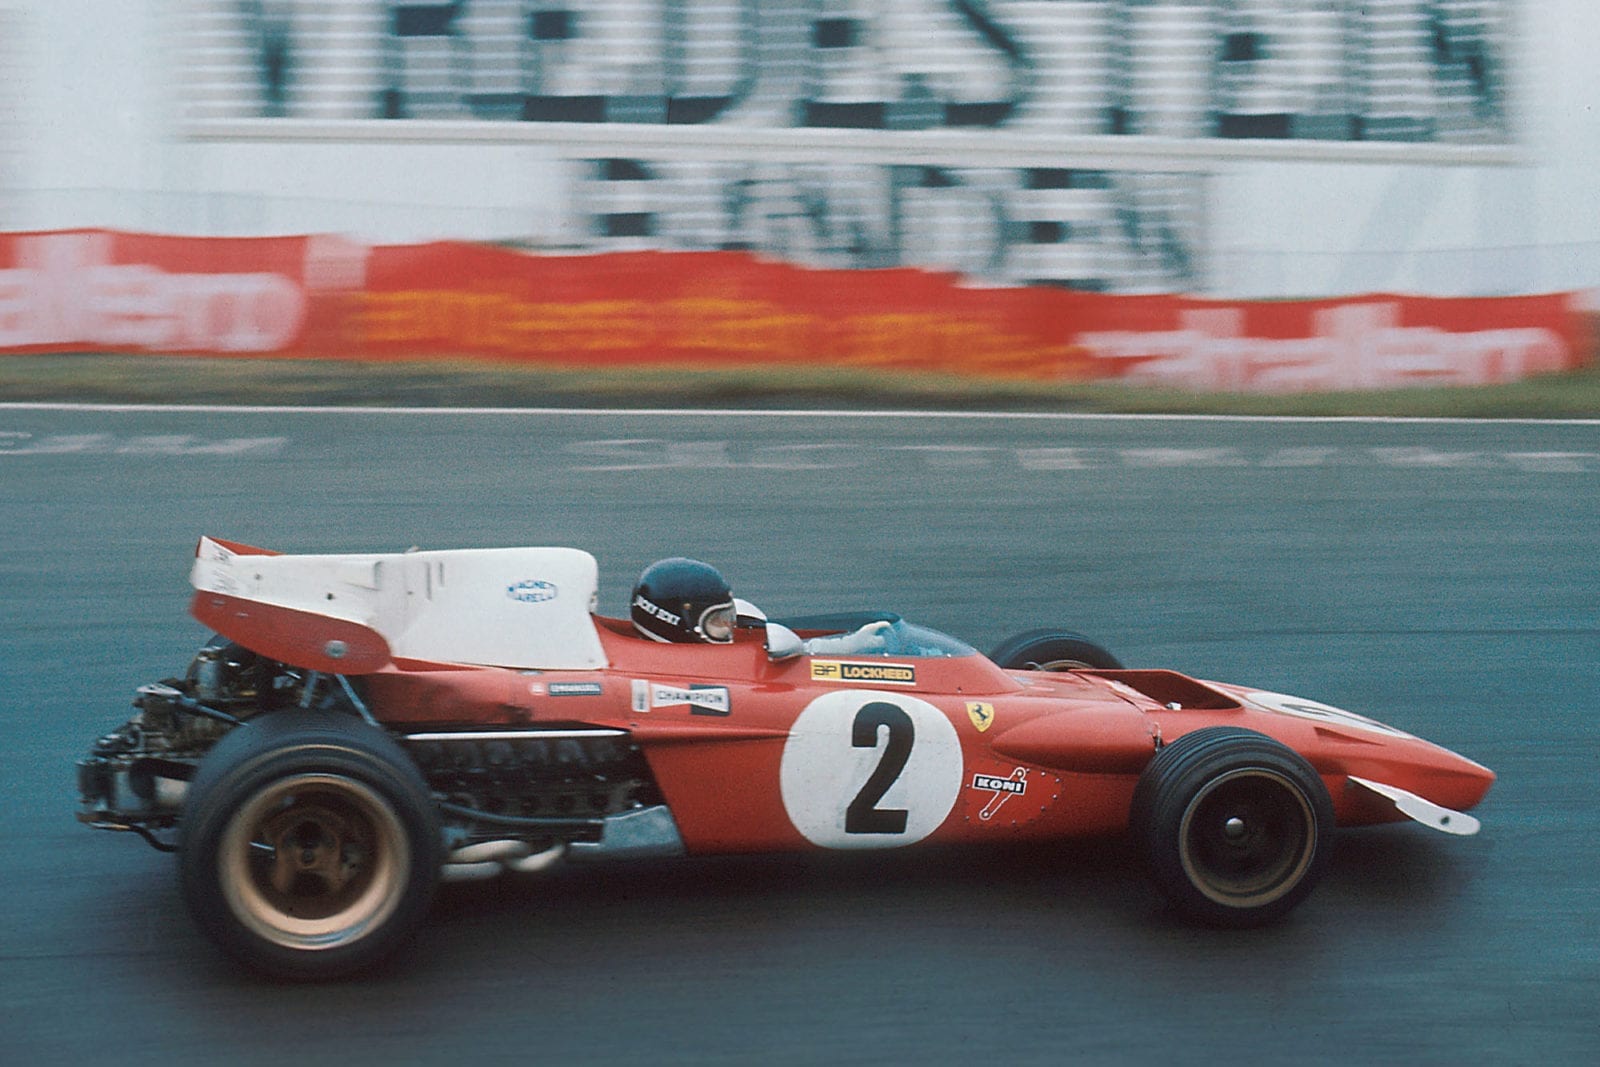 Jacky Ickx driving for Ferrari at the 1970 Dutch Grand Prix